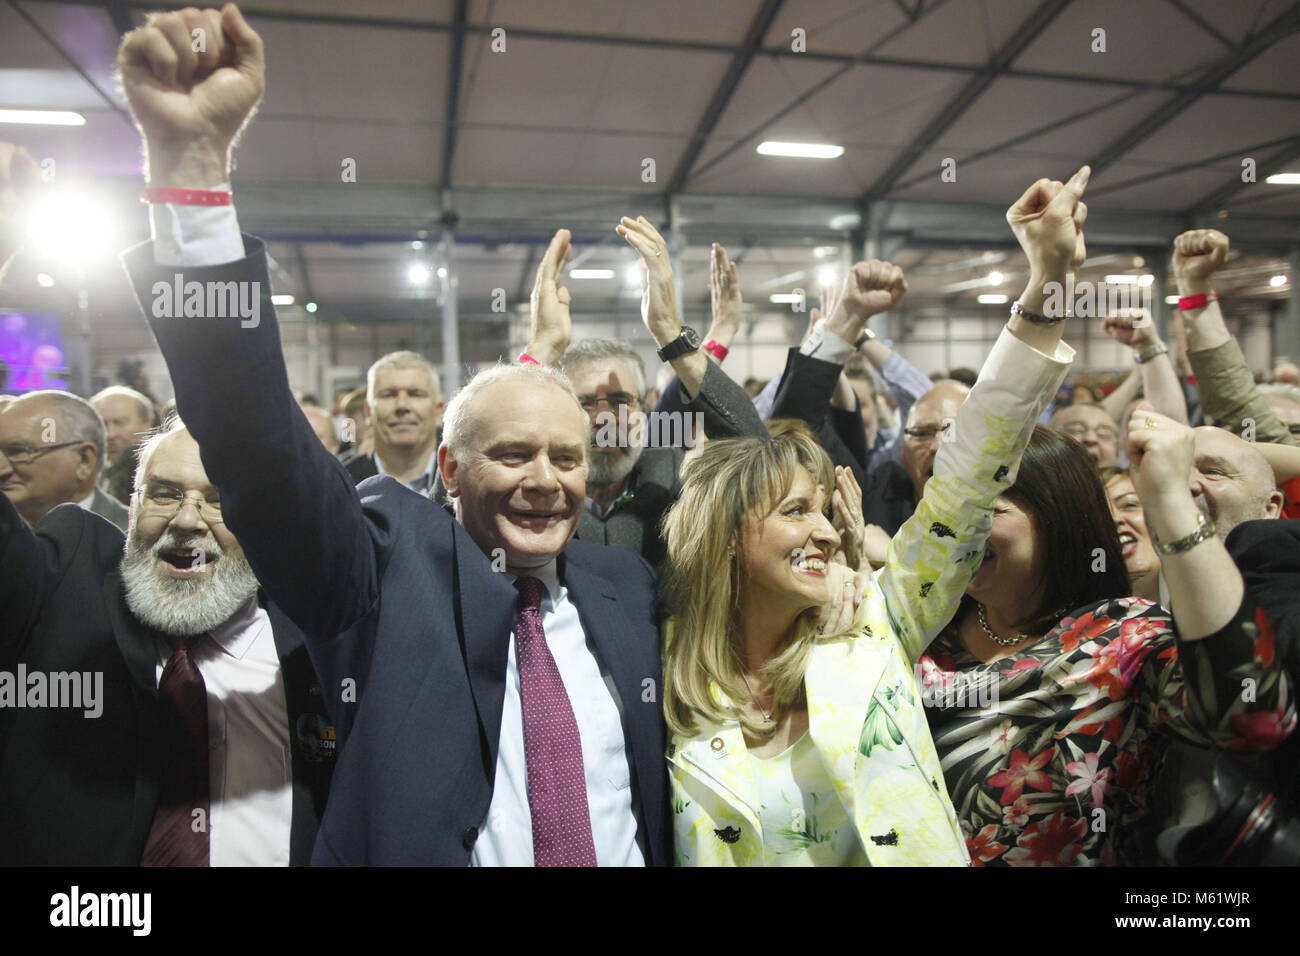 Sinn Fein's Martina Anderson, centre celebrates with party members Michelle Gildernew, right, and Martin McGuinness, left, after topping the poll at the Kings Hall count centre, Belfast, Northern Ireland, Monday, May 26, 2014. Anderson topped the poll in the European elections for Northern Ireland, She polled 159,813 votes, beating the quota by over 3,000 votes to become the first of Northern Ireland's MEP's. Photo/ Paul McErlane Stock Photo